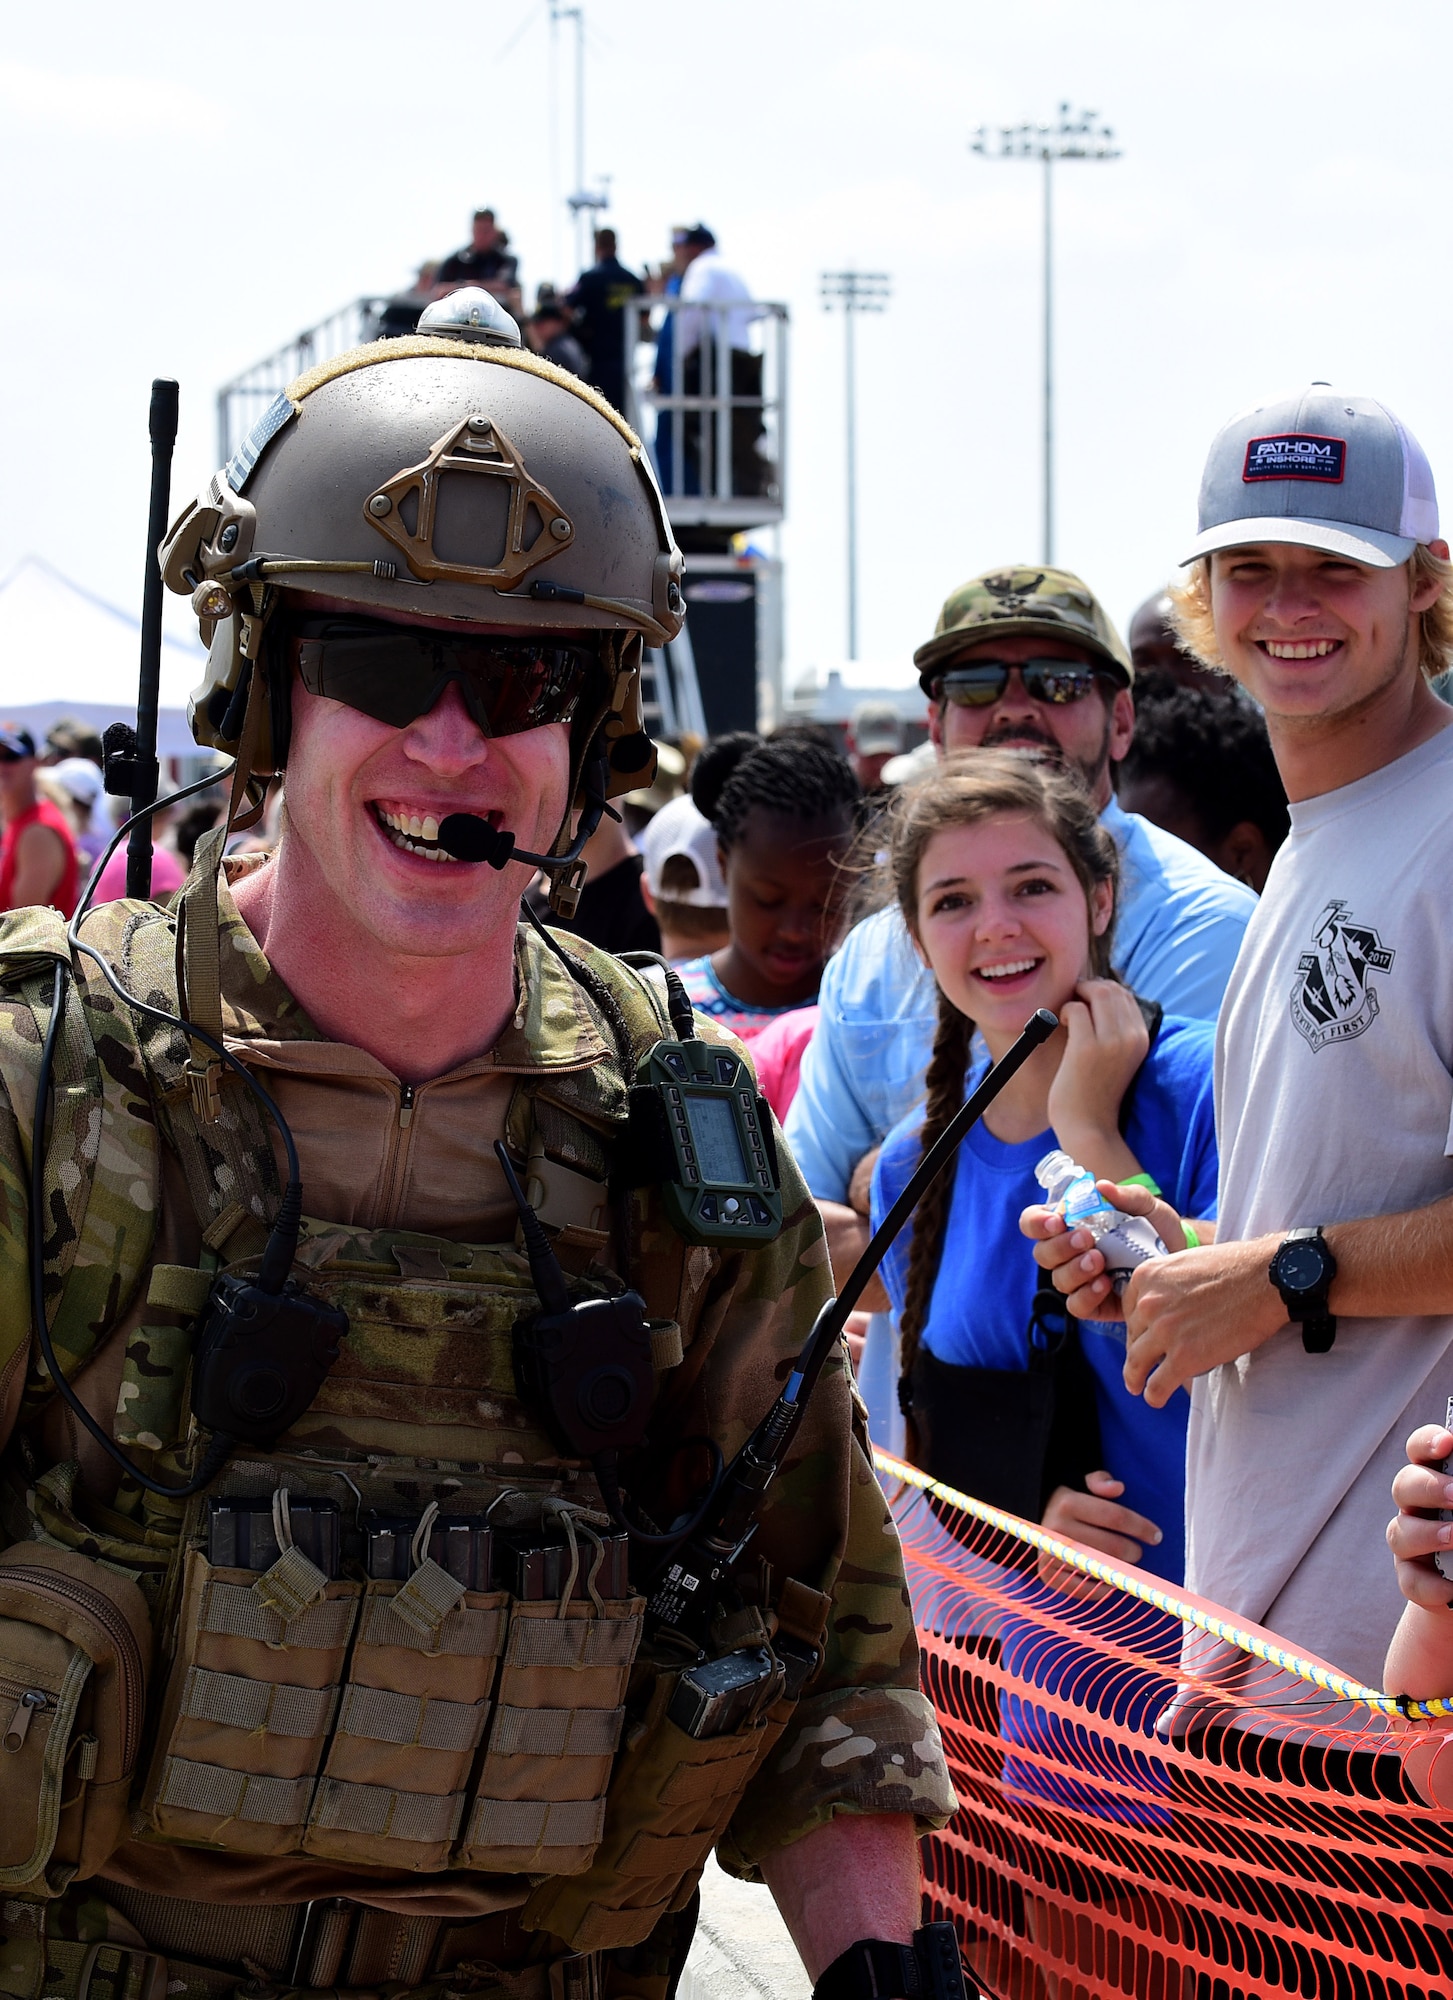 A Joint Terminal Attack Controller takes pictures among the crowd during the Wings Over Wayne Air Show, May 21, 2017, at Seymour Johnson Air Force Base, North Carolina. Seymour Johnson AFB opened its gates to the public for a free, two-day event as a way to thank the local community for their ongoing support of the base’s mission. (U.S. Air Force photo by Airman 1st Class Kenneth Boyton)